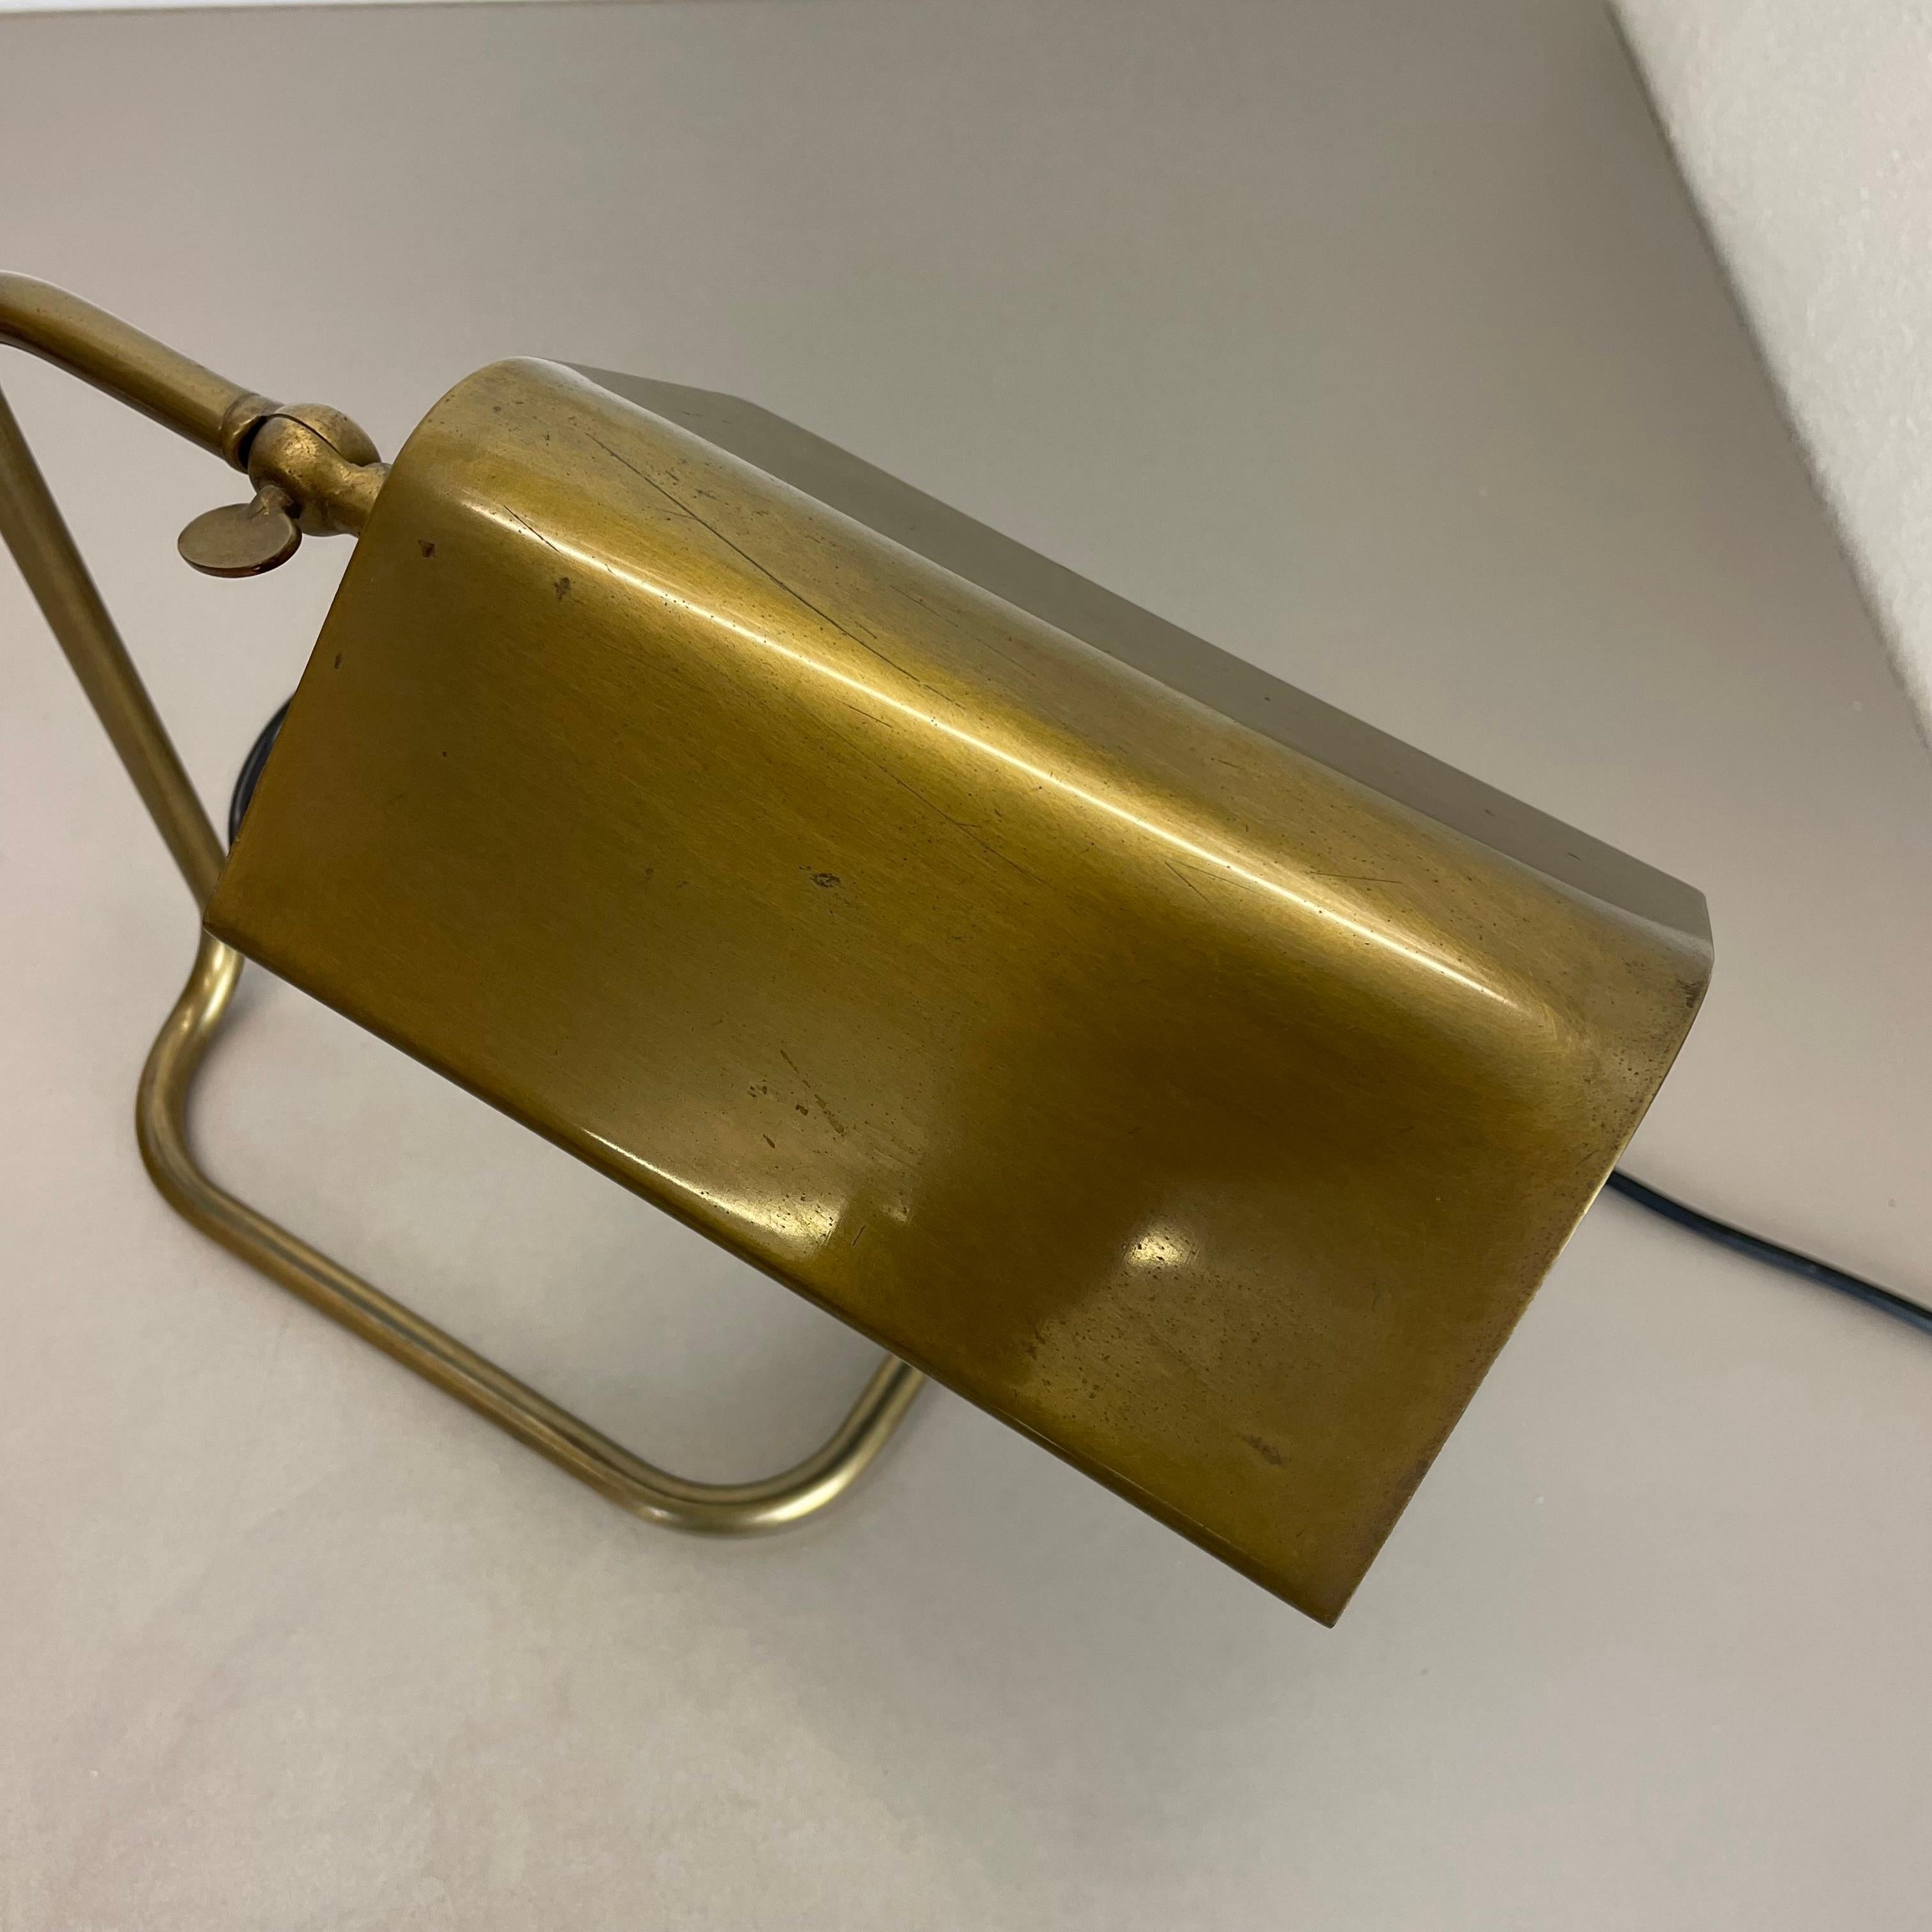 Cubic Modernist Brass Metal Table Light by Florian Schulz, Germany, 1970s For Sale 10